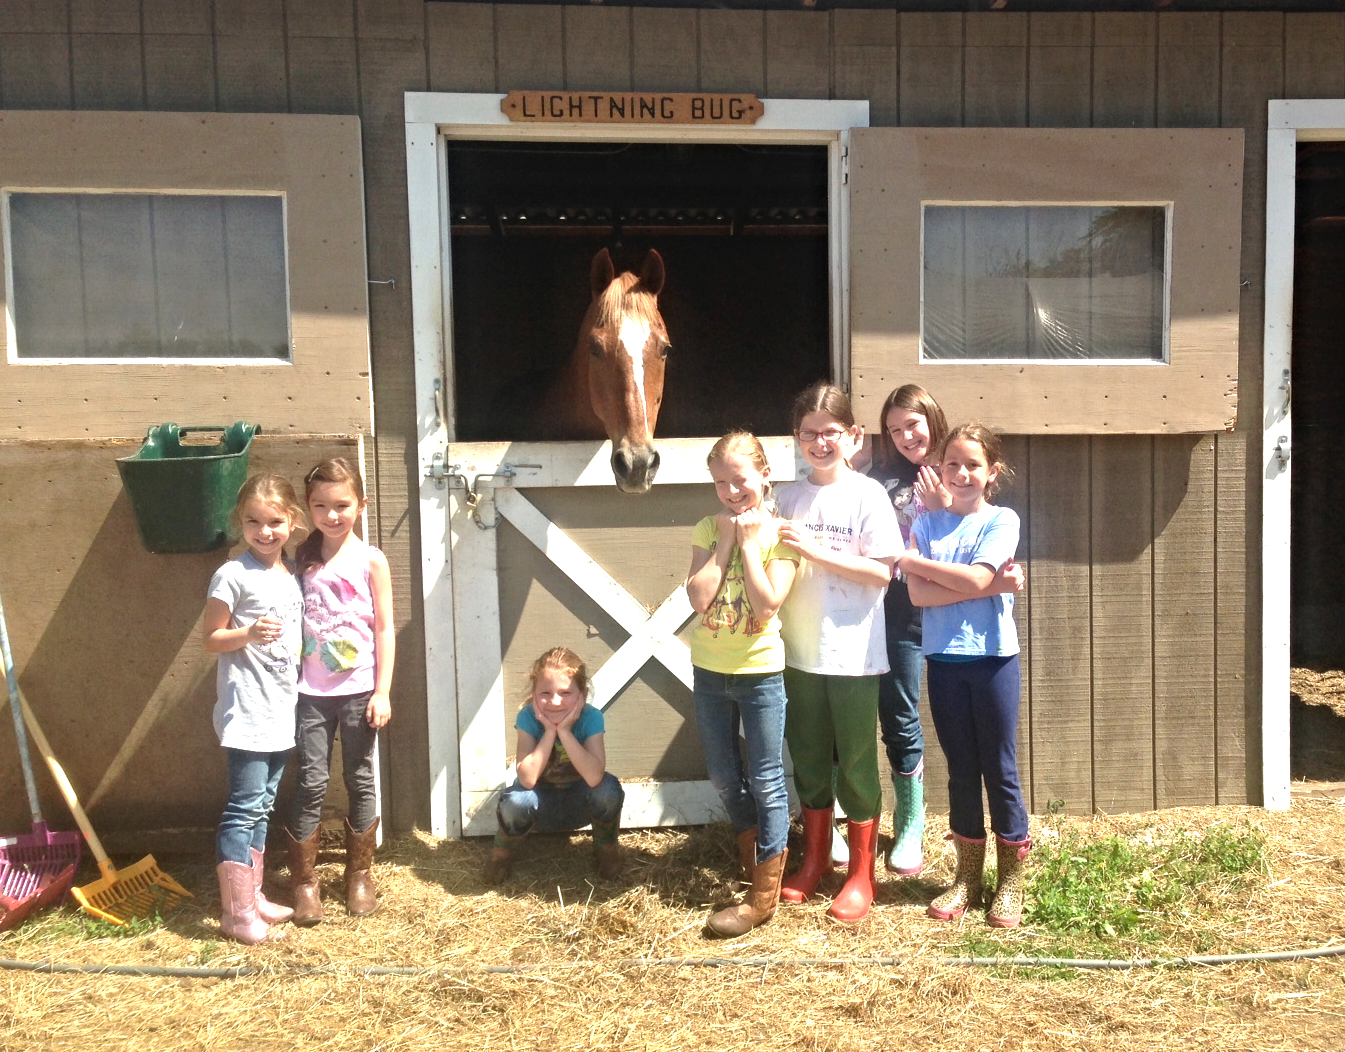 7 children standing outside a stable with a horse piking out its head.